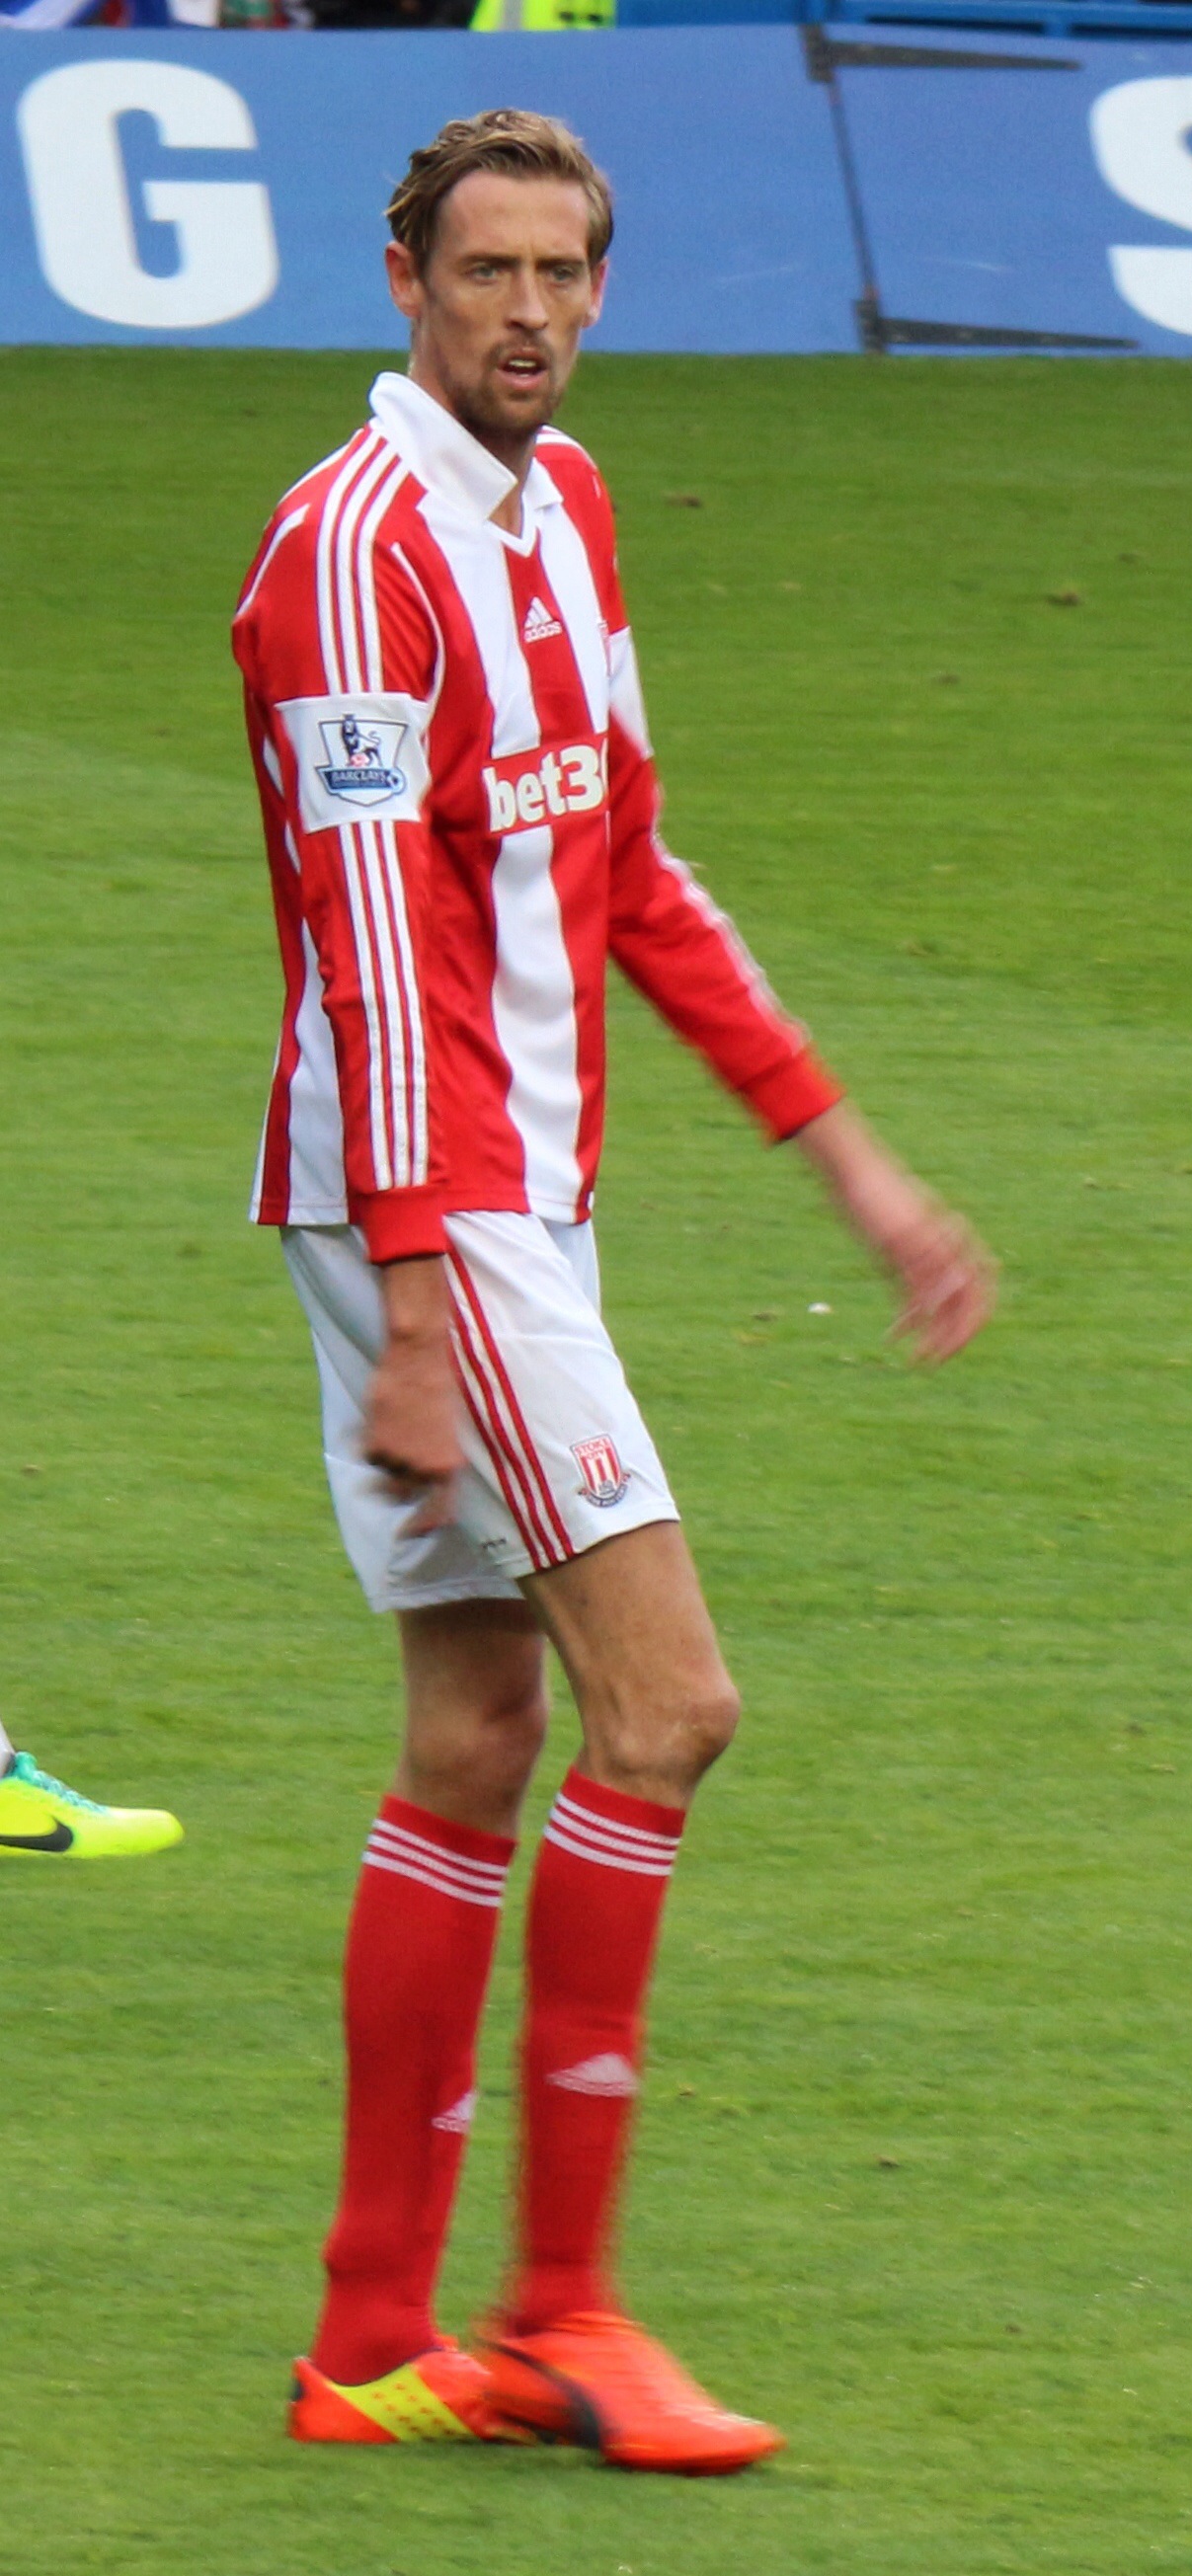 Peter Crouch Wikipedia